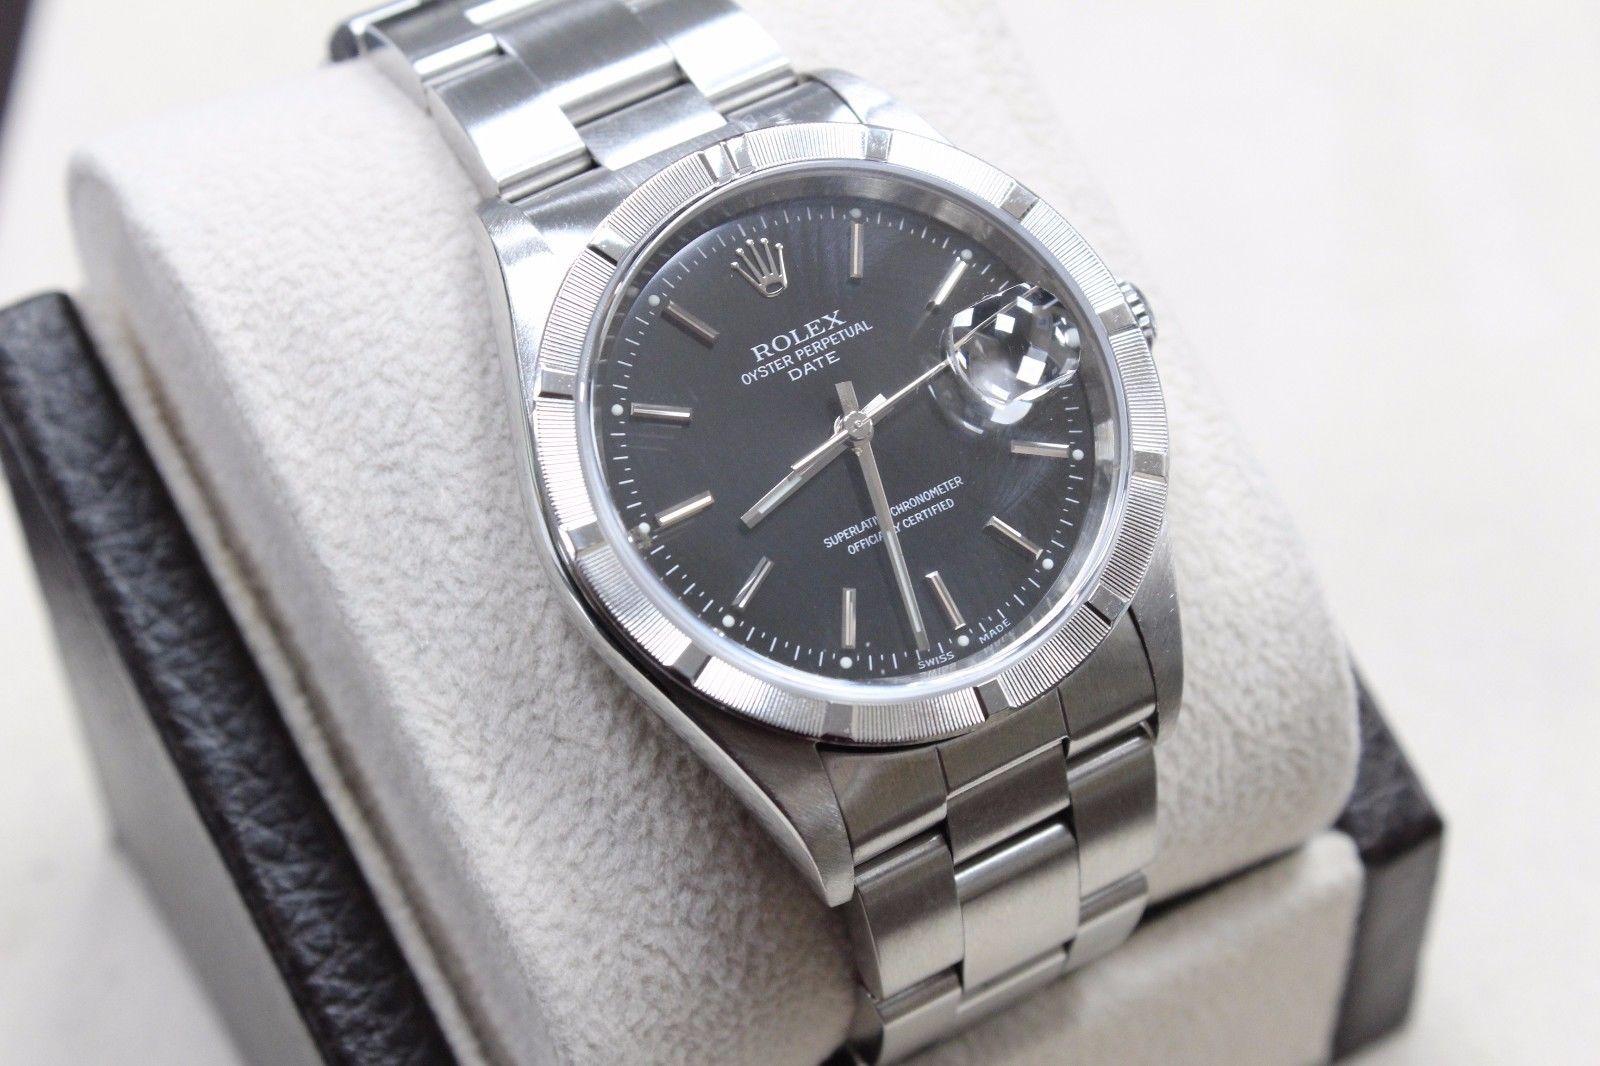 Style Number: 15210 

Serial: A888***

Model: Date

Case Material: Stainless Steel 

Band: Stainless Steel

Bezel: Stainless Steel 

Dial: Black

Face: Sapphire Crystal 

Case Size: 34mm

Includes: 

-Rolex Box & Papers

-Certified Appraisal 

-6